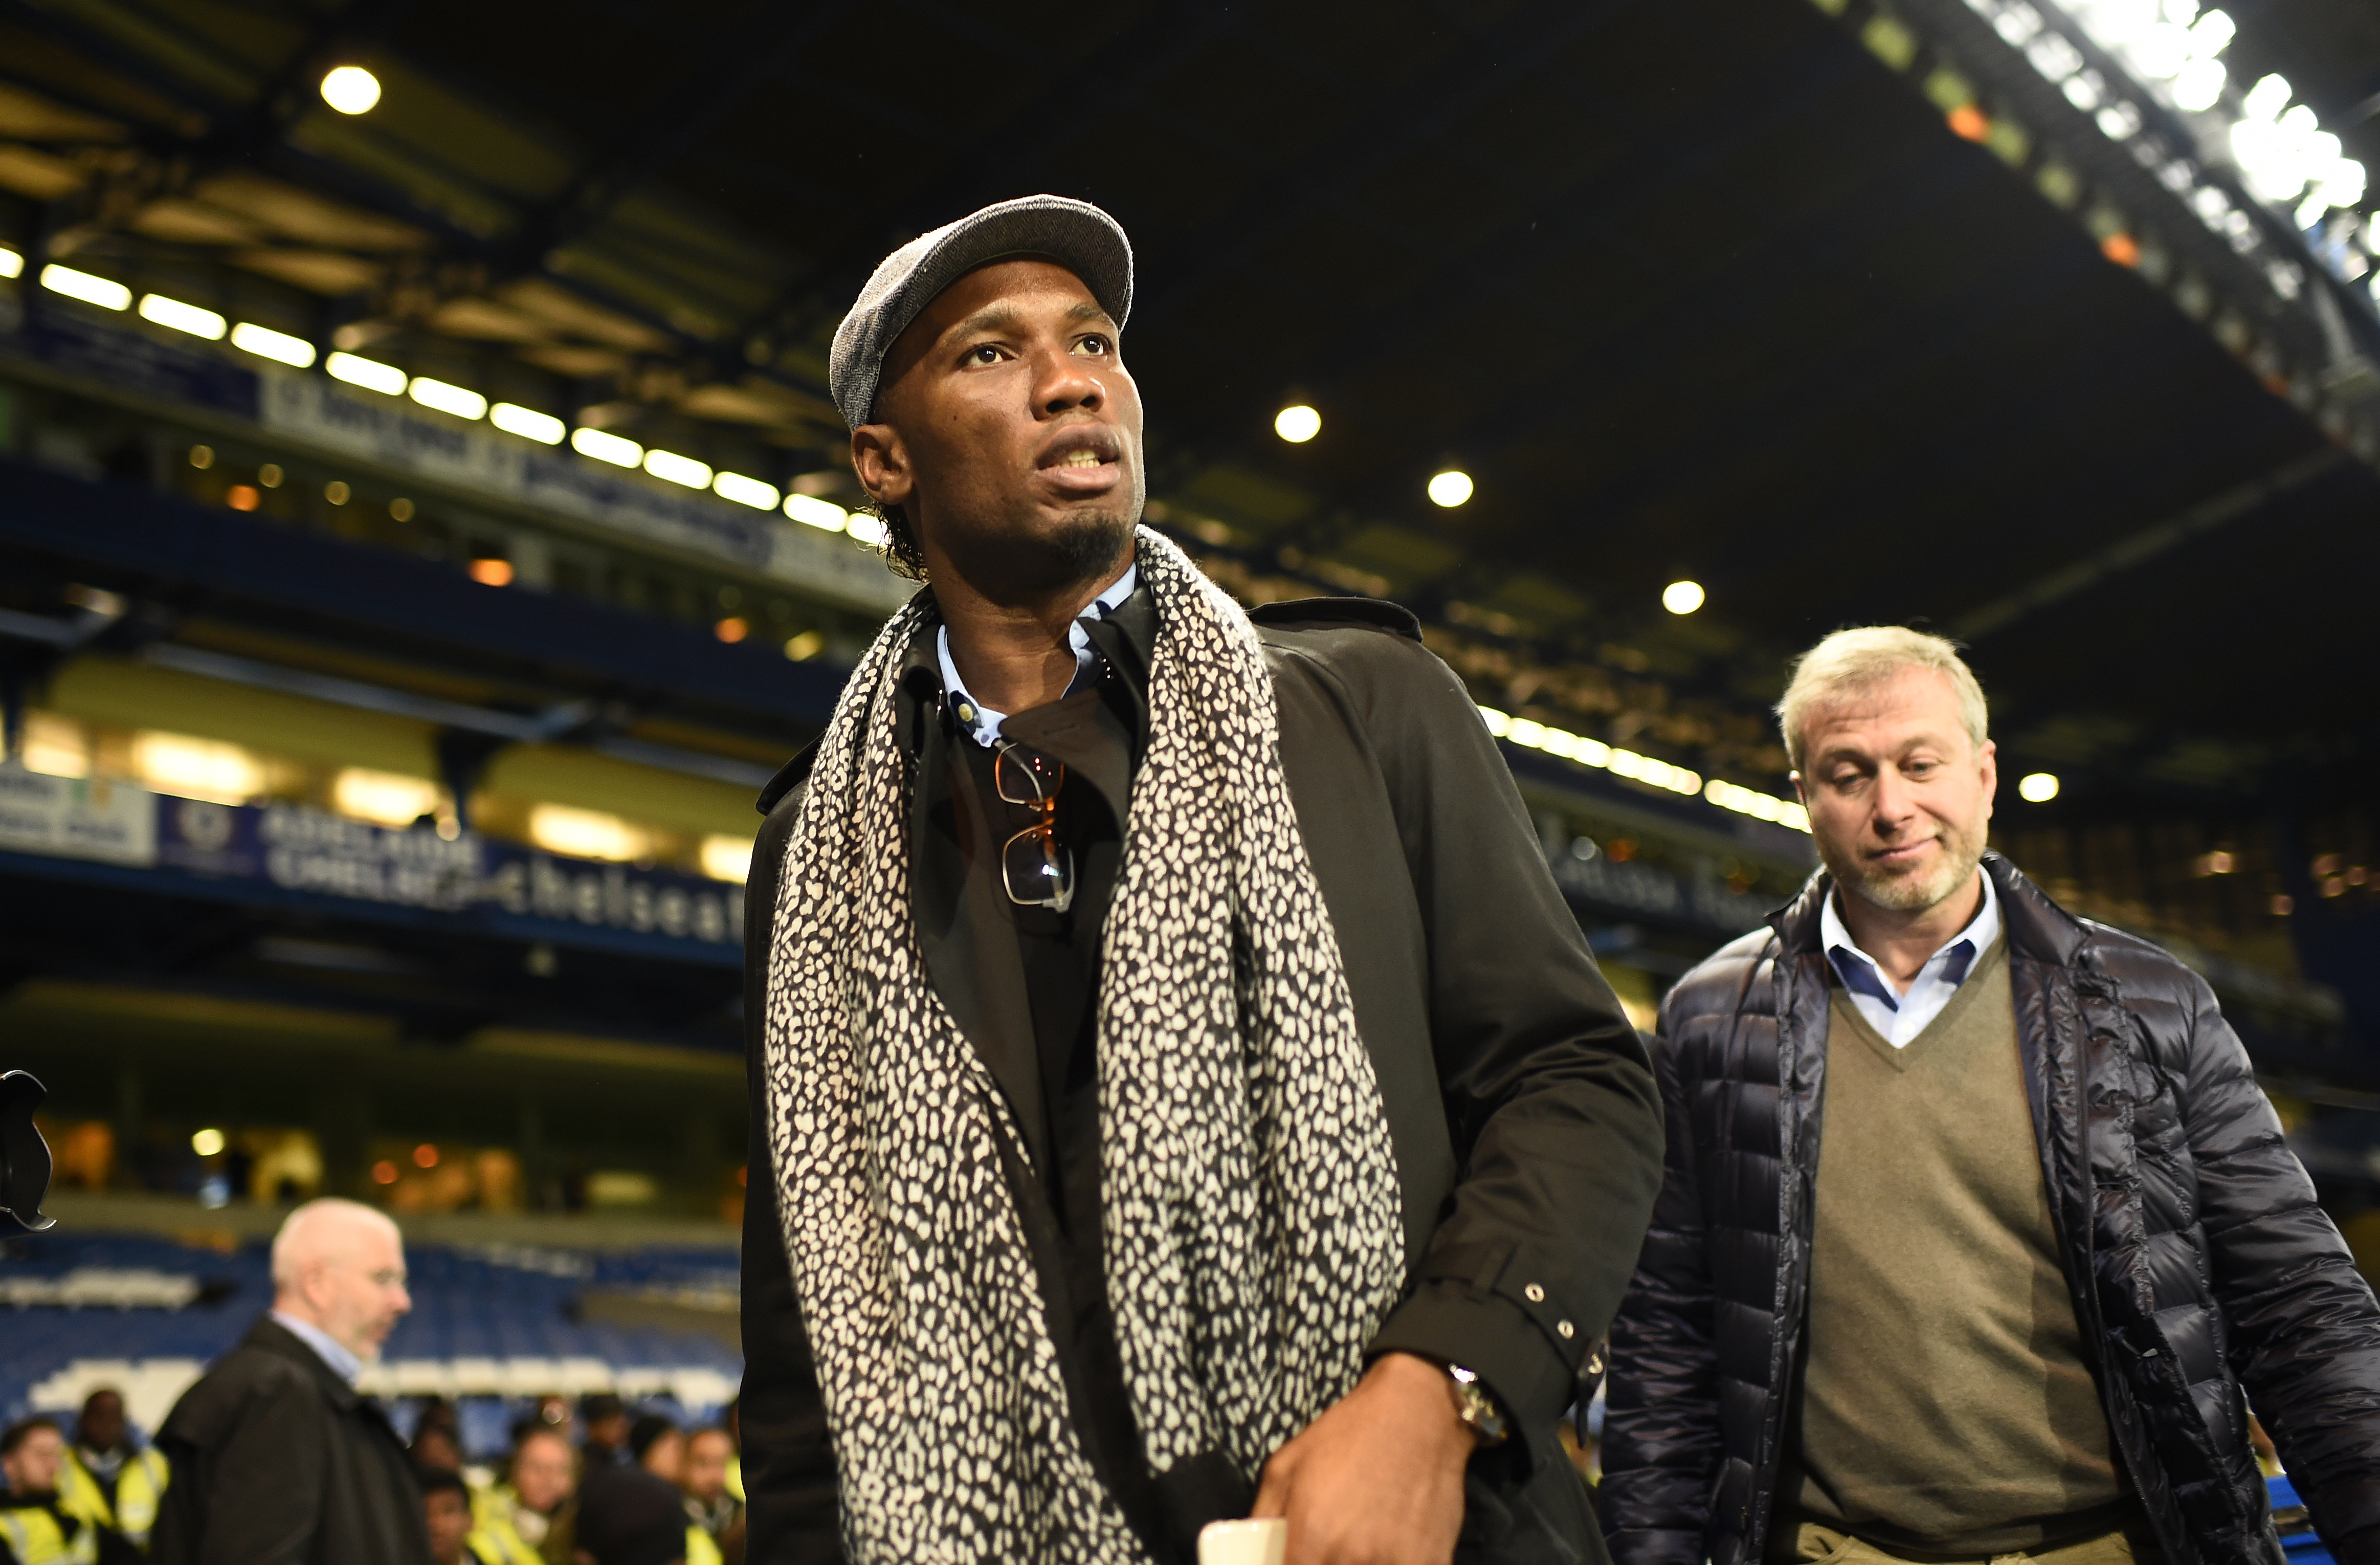 Chelsea owner Roman Abramovich and Didier Drogba after the game at Stamford Bridge in December 19, 2015. Photo: Reuters